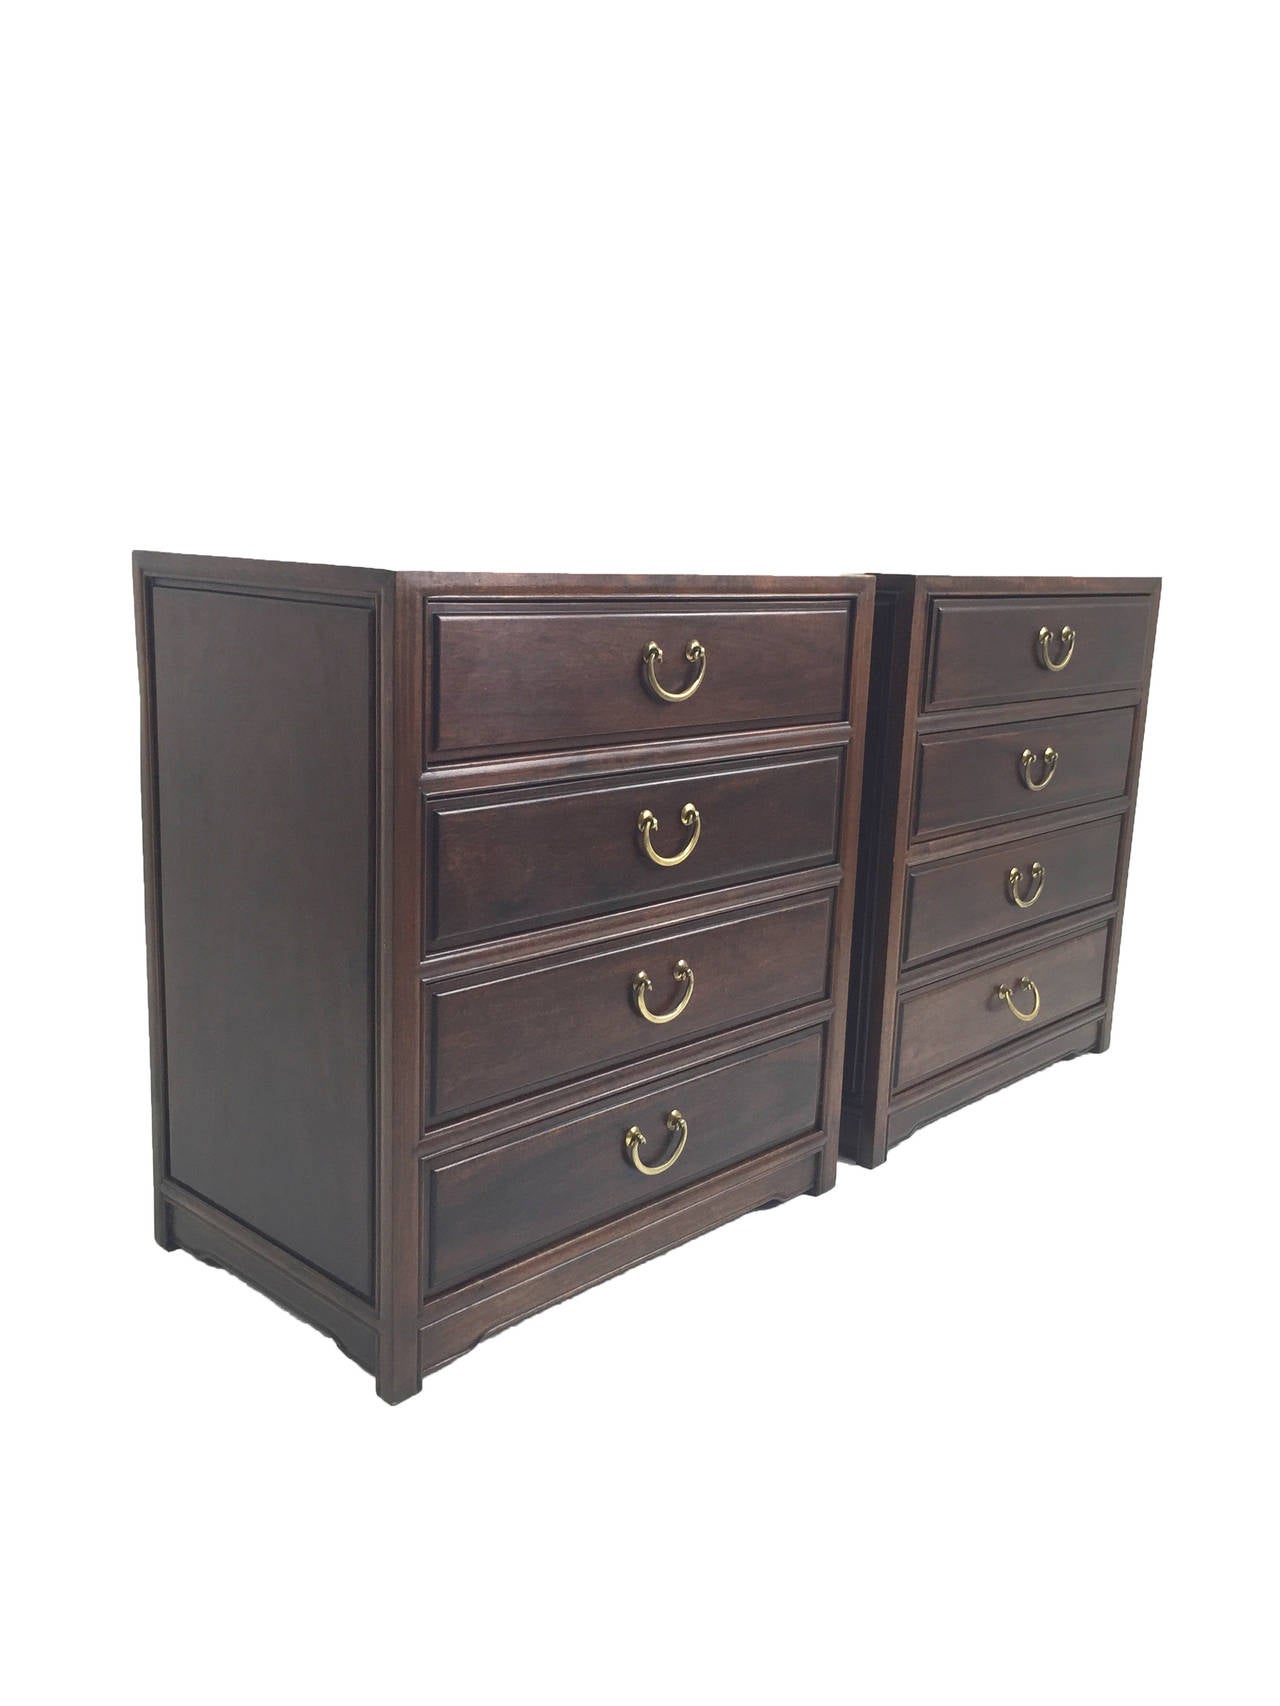 A lovely pair of petite rosewood dressers with brass bail handles.